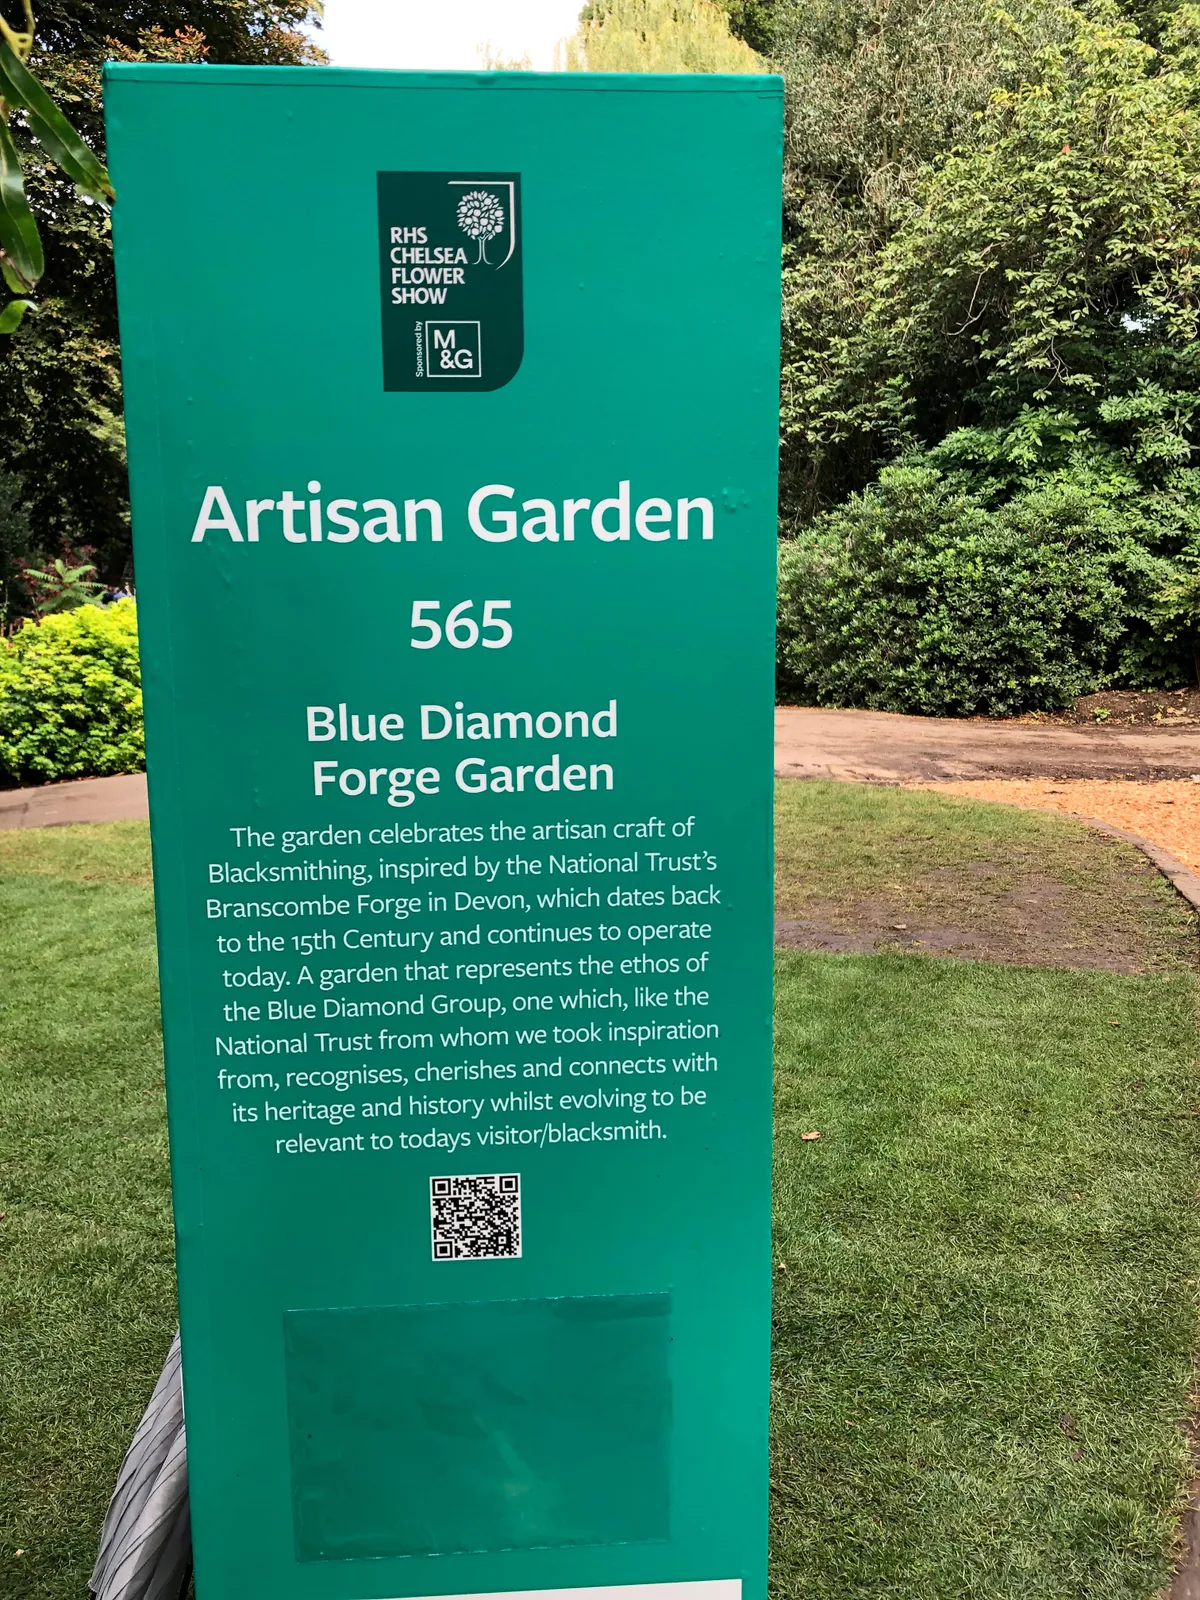 The Blue Diamond Forge Garden at Chelsea 2021